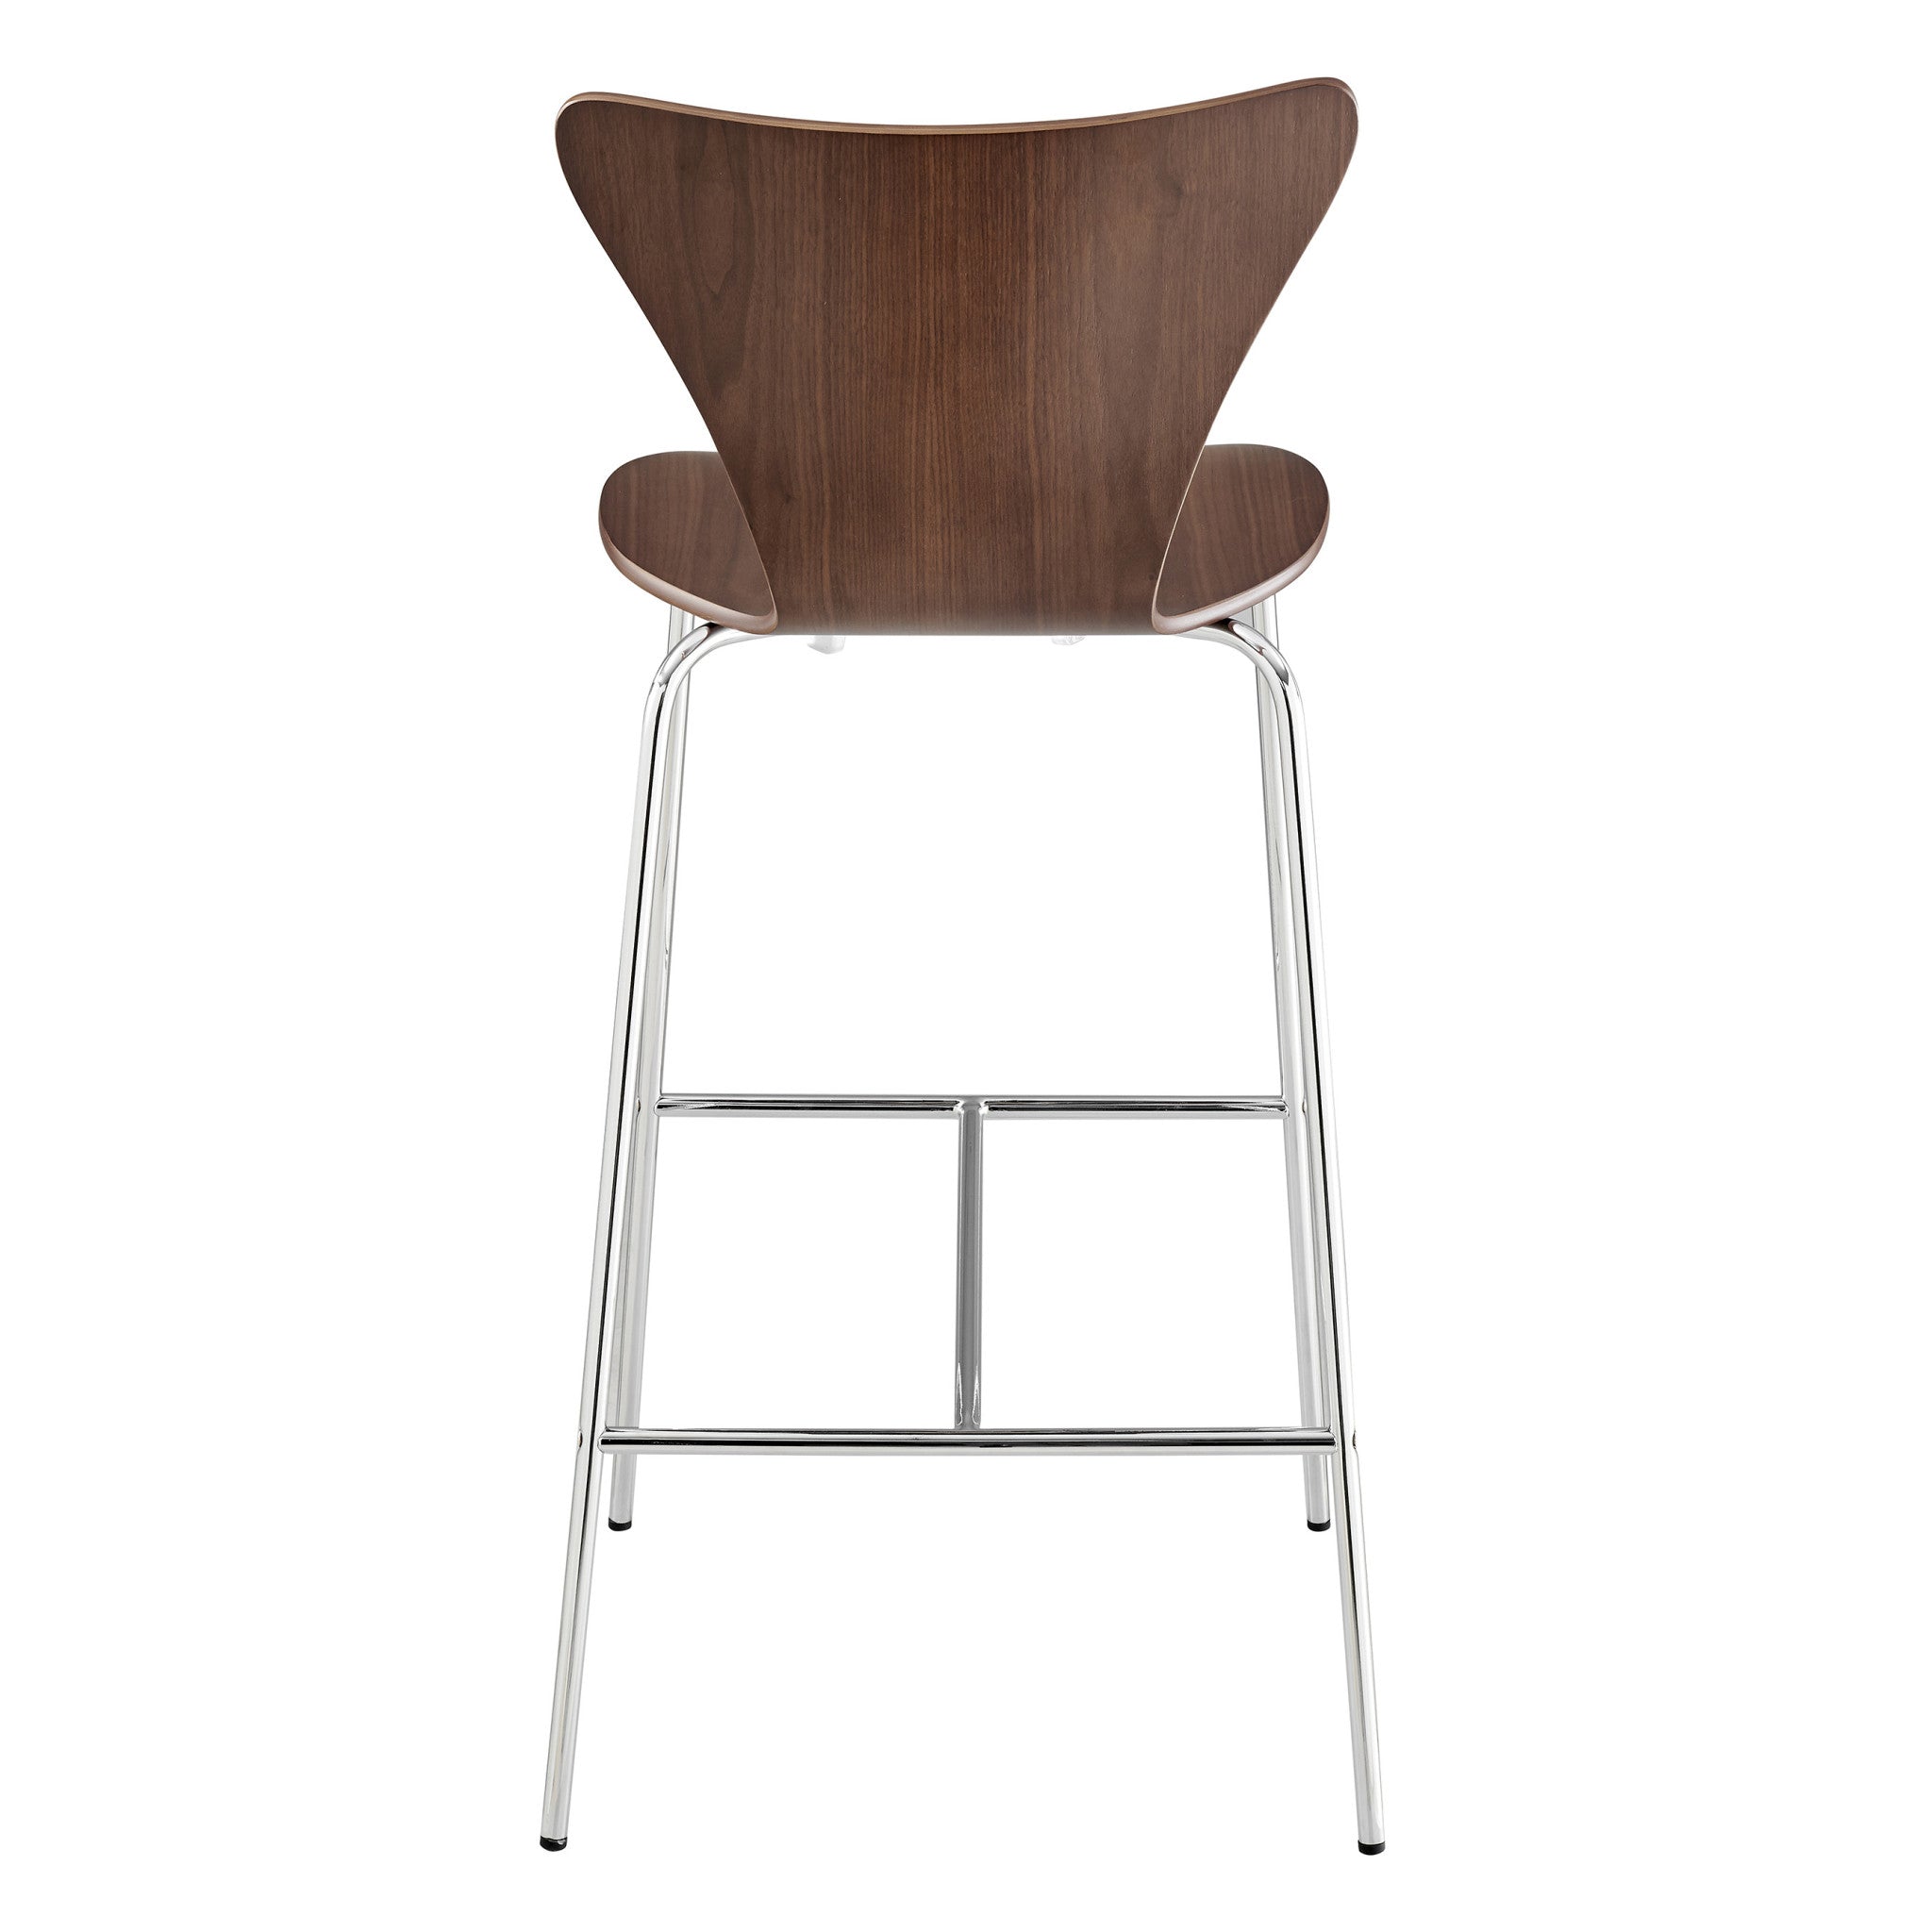 30" Brown And Silver Metallic Stainless Steel Bar Chair